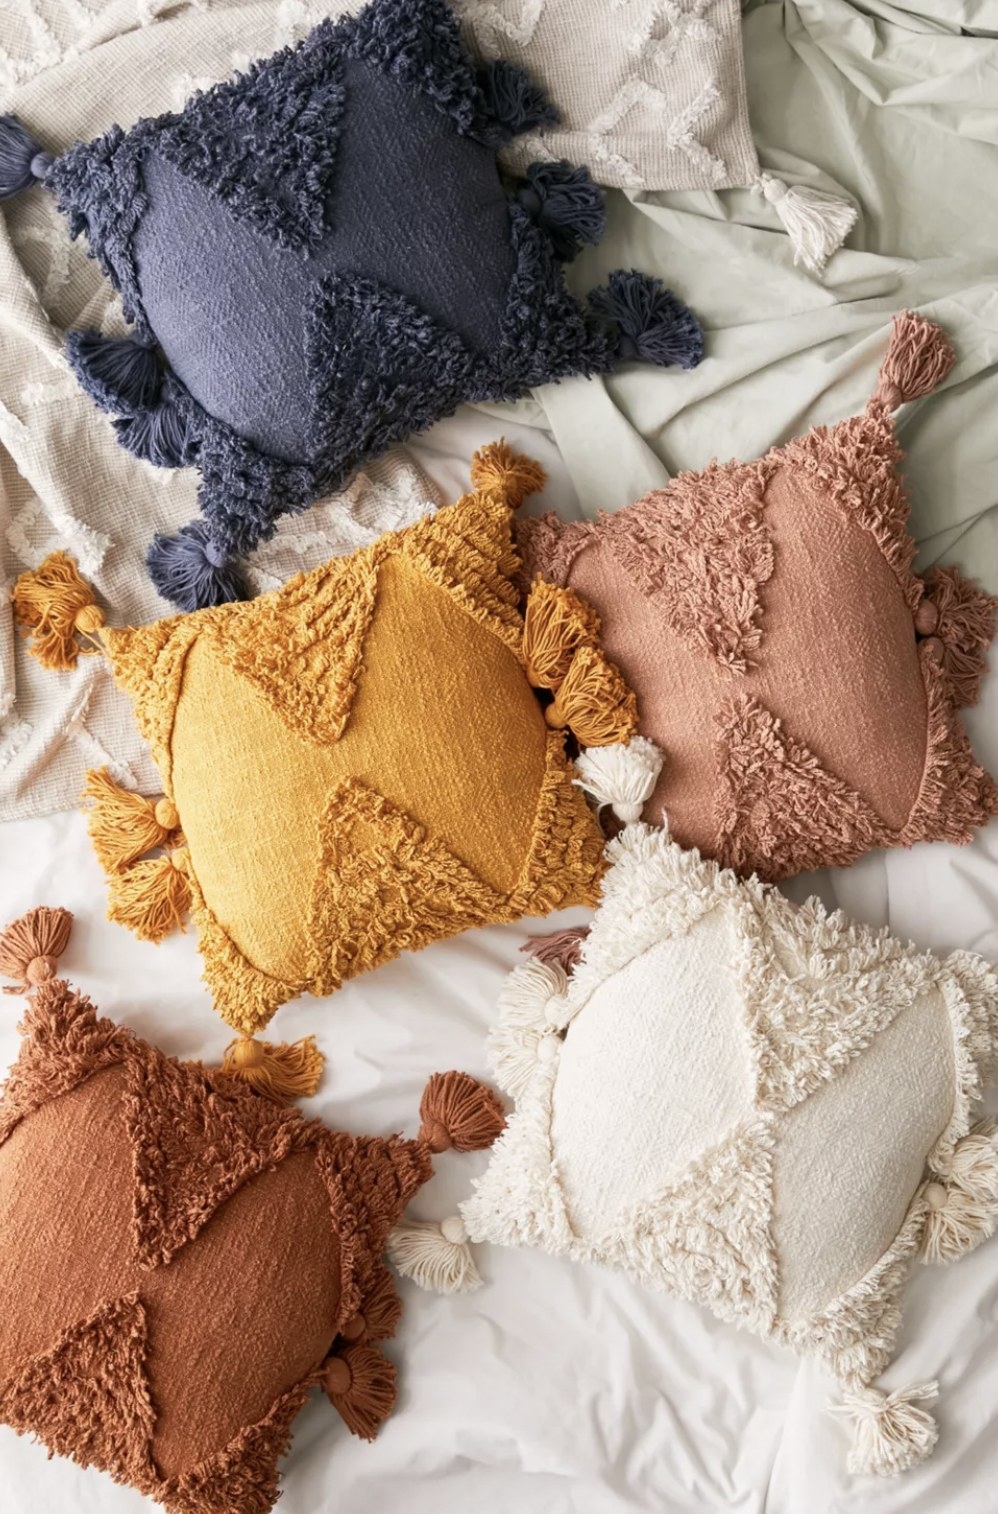 five of the pillows in various colors